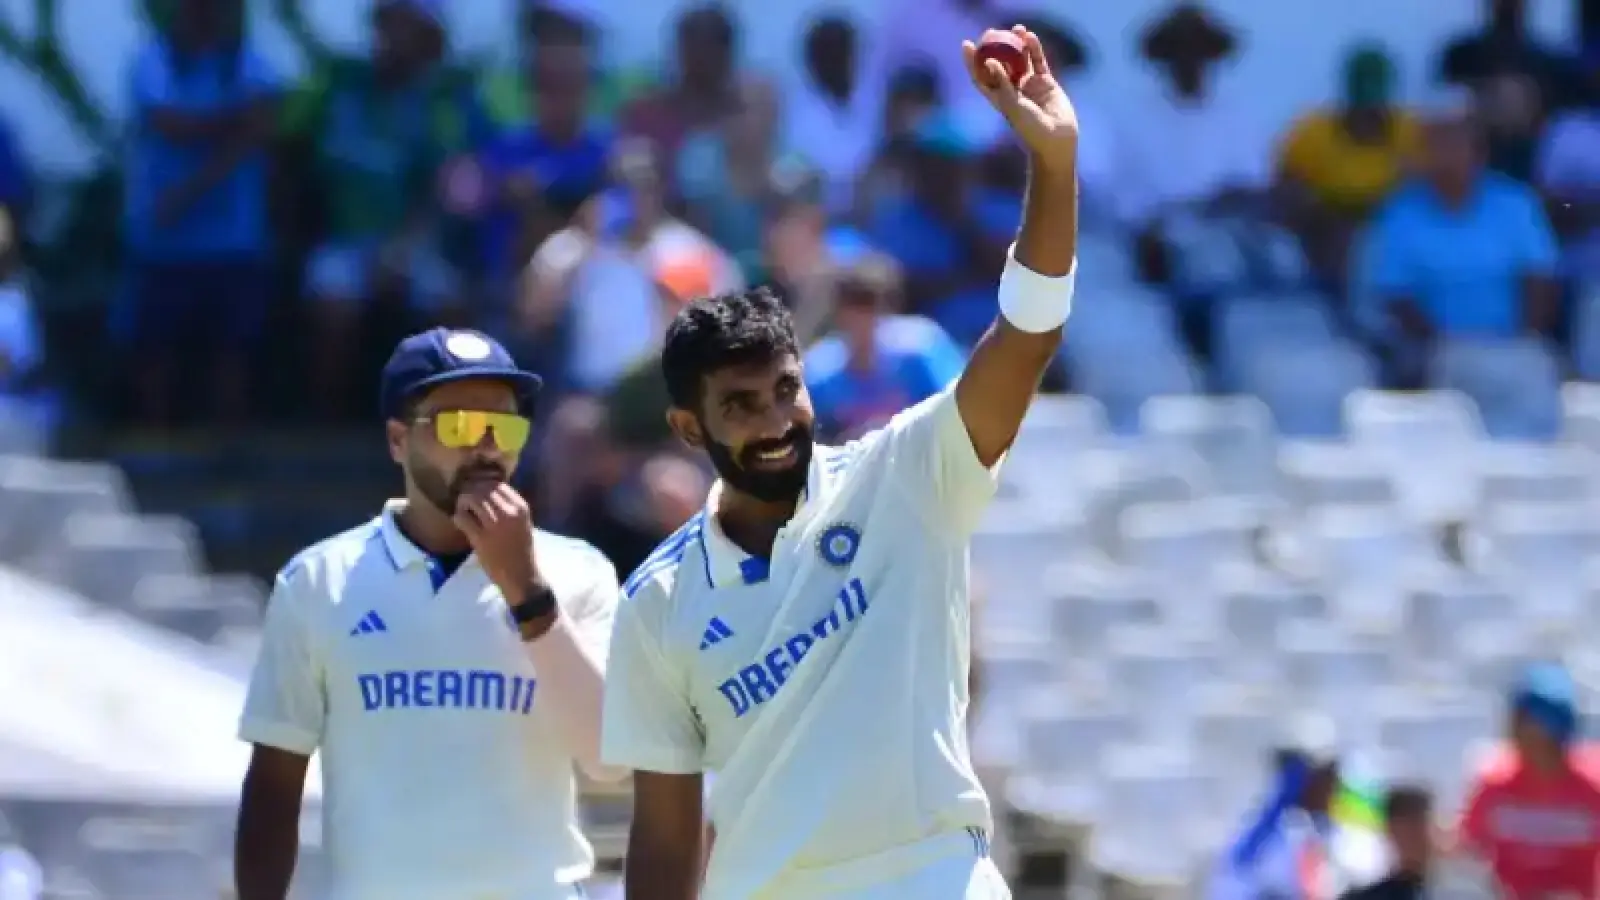 IND vs. SA: After ten years away, Indian fast bowlers Bumrah and Siraj accomplished a significant feat